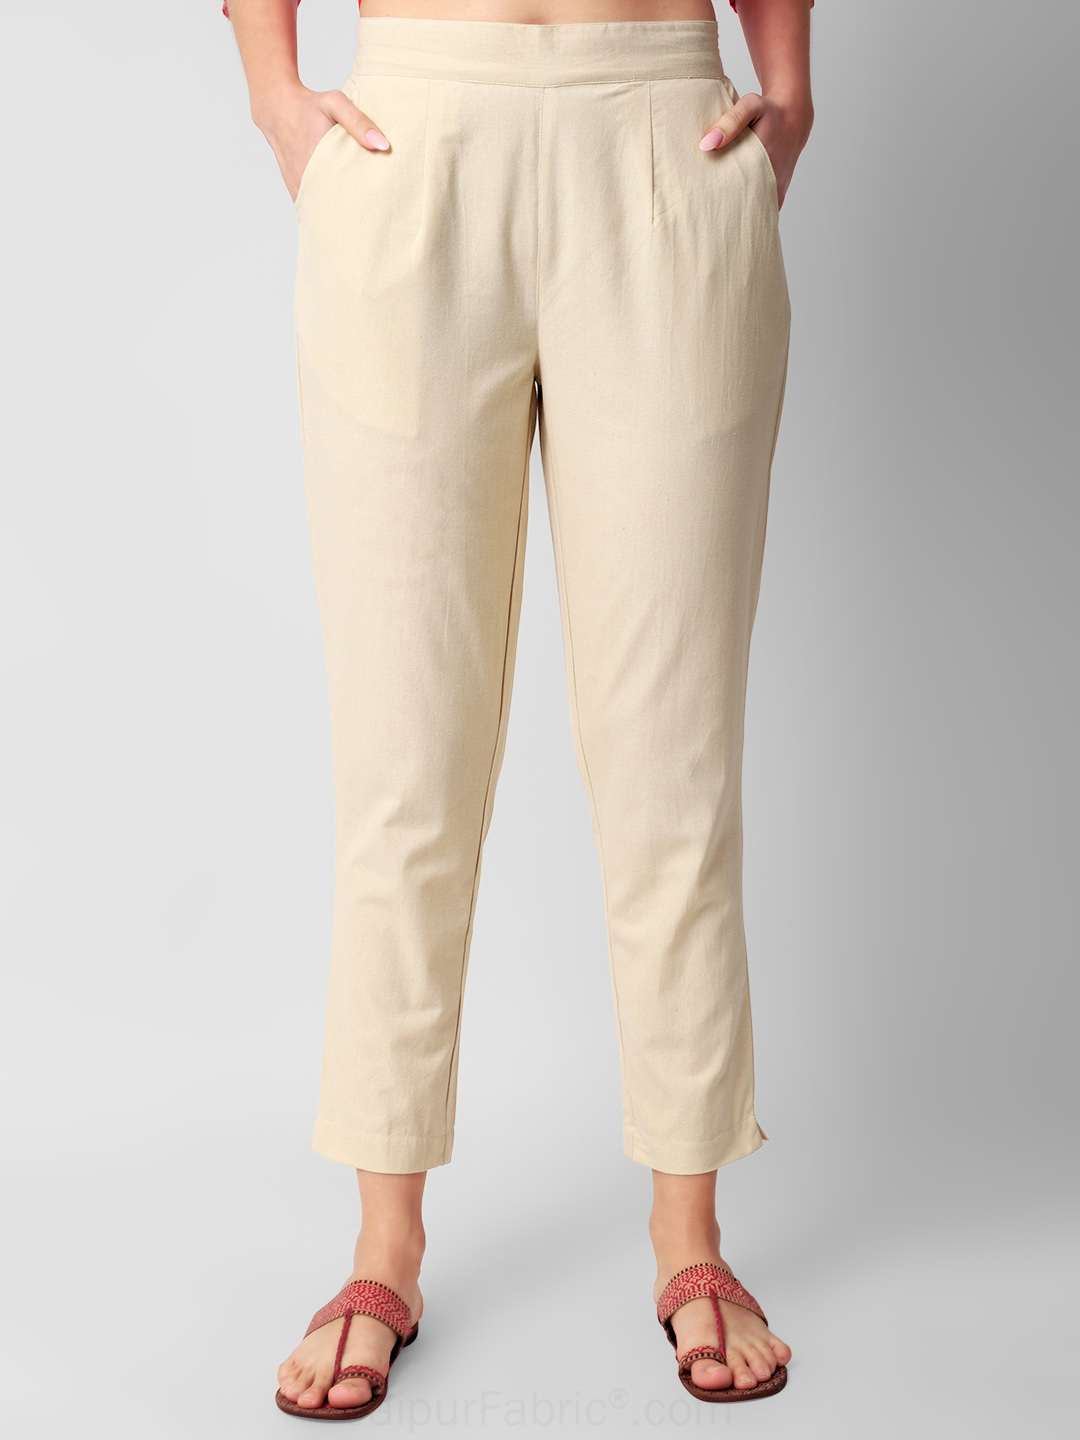 Caramel Cream Women Cotton Pants casual and semi formal daily trousers